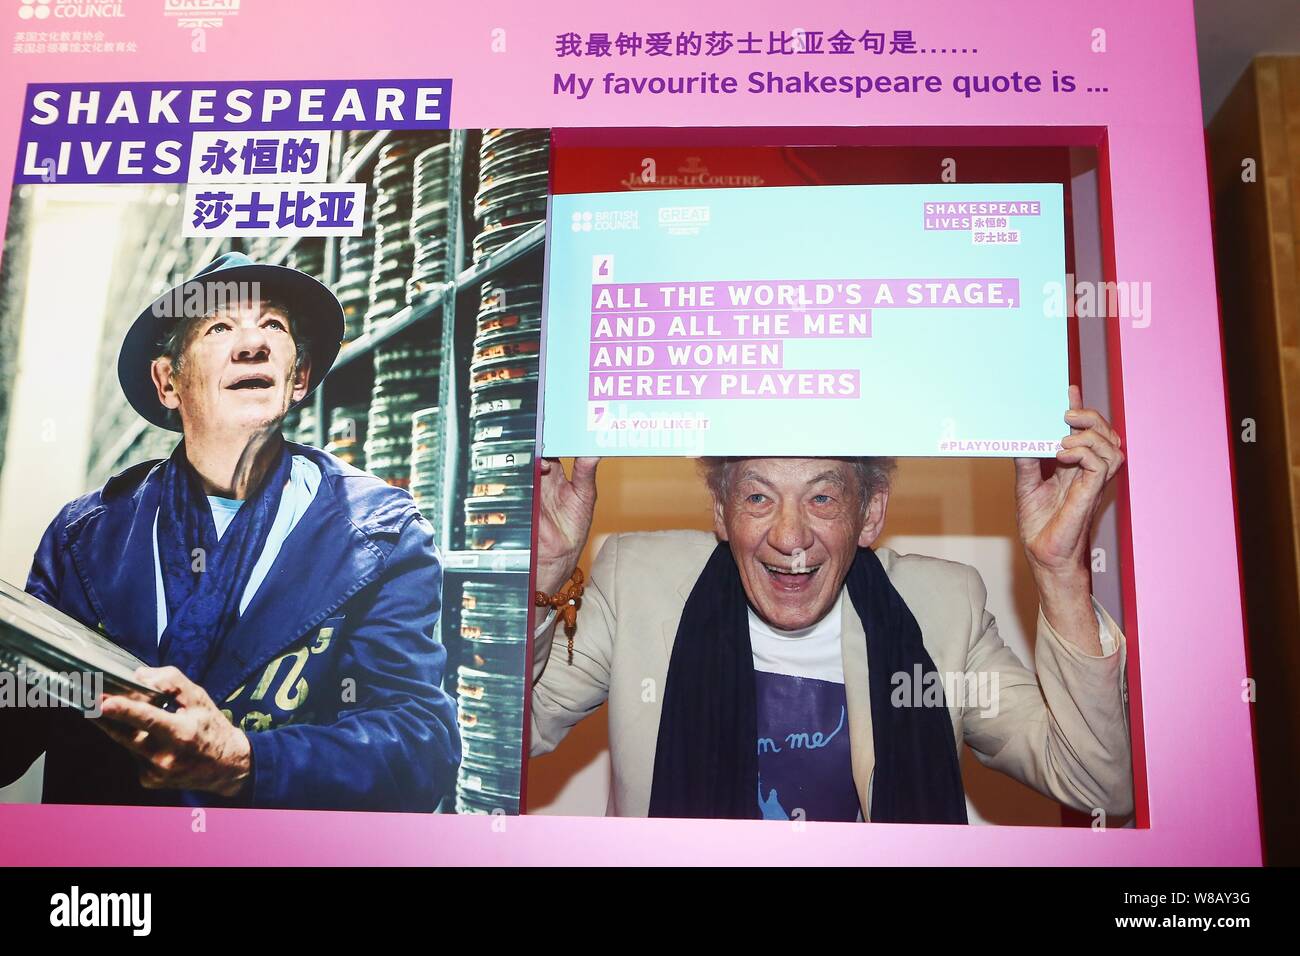 English actor Sir Ian McKellen poses at a press conference to promote the British Council's 'Shakespeare Lives' program during the 19th Shanghai Inter Stock Photo